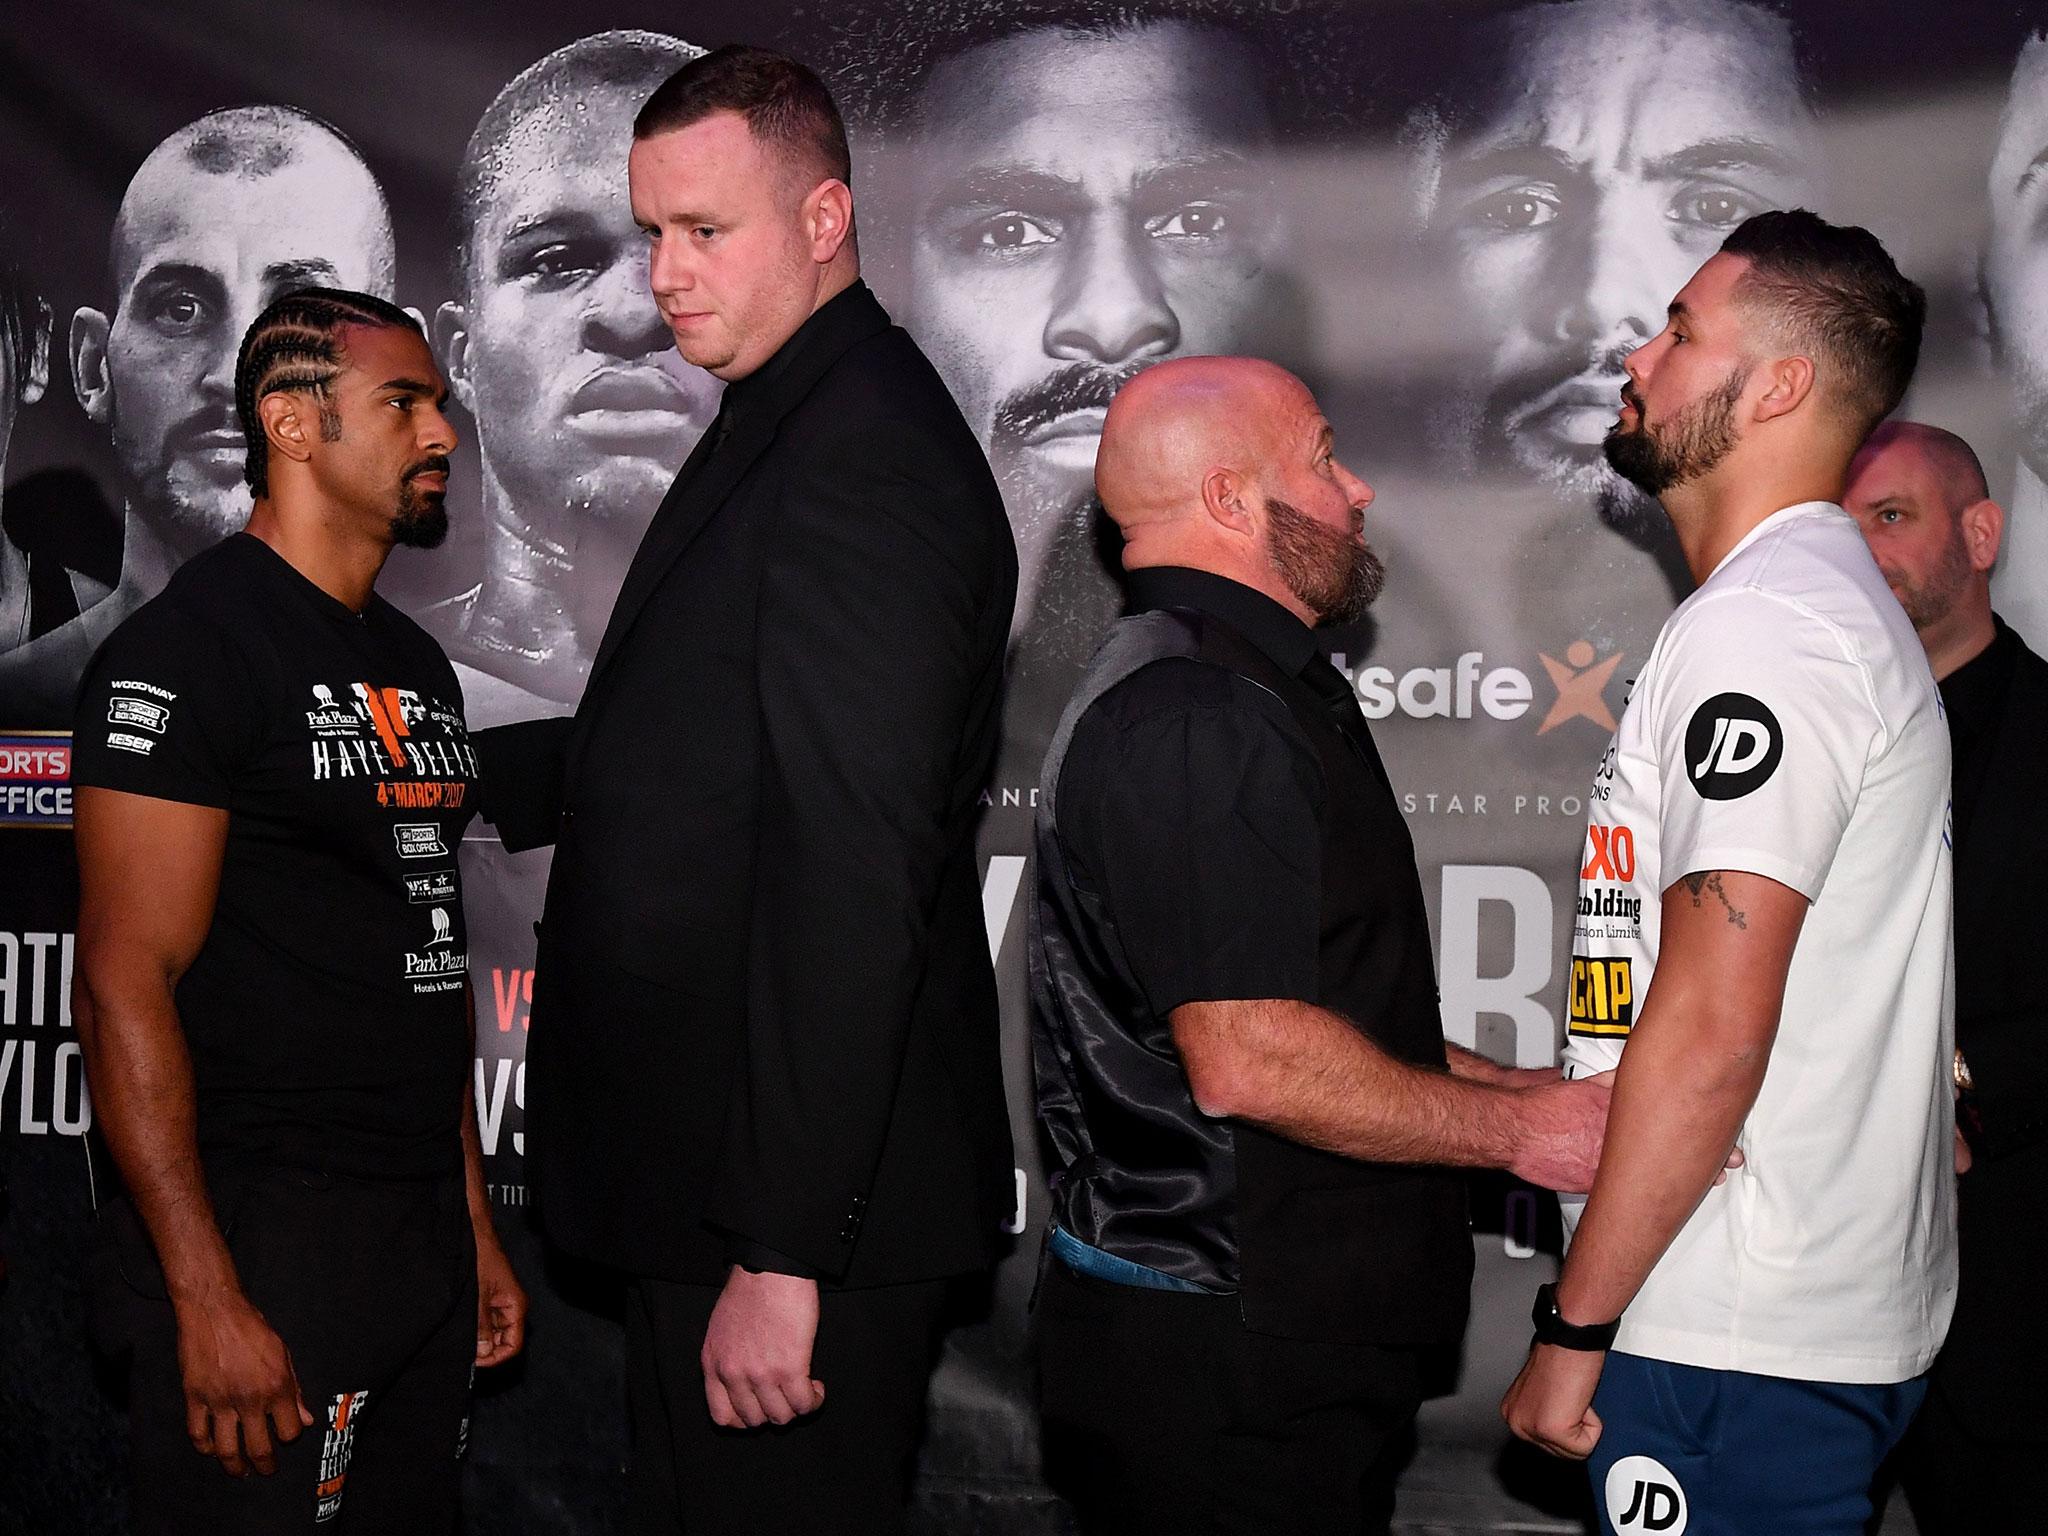 Once the talking is over, David Haye and Tony Bellew will put on a spectacle of a fight